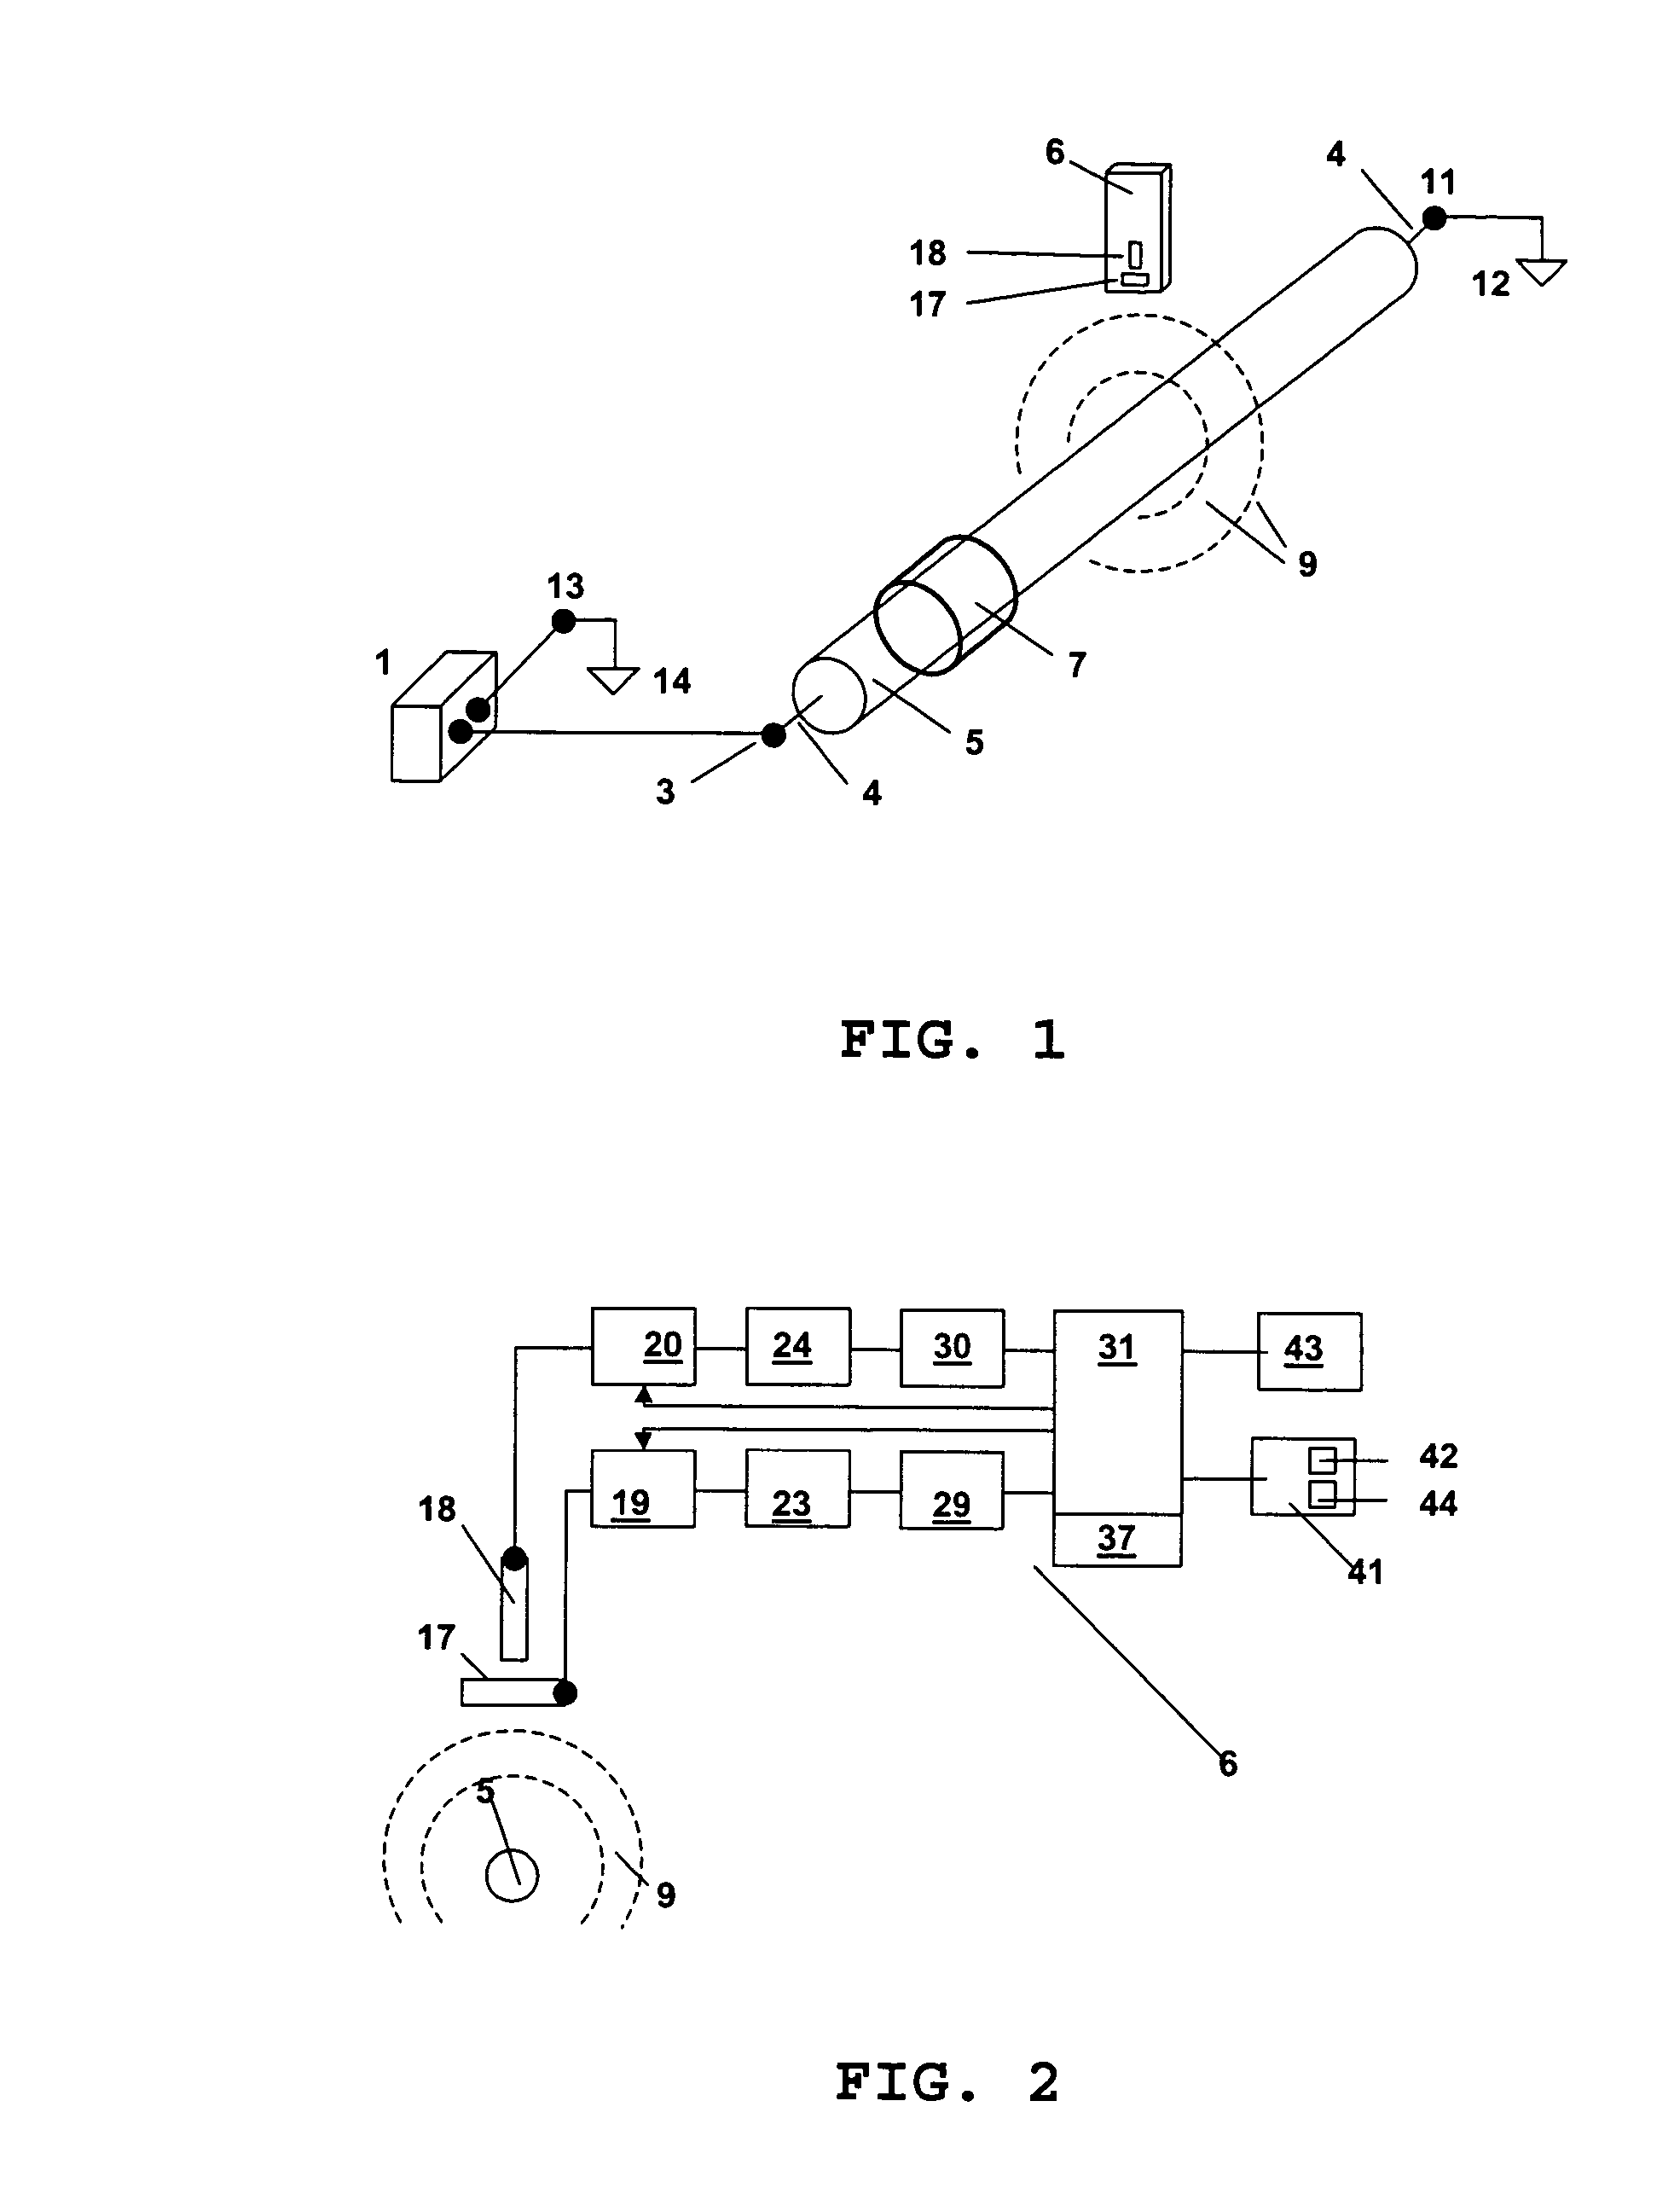 Method and apparatus for the location and indication of cable splices and cable faults